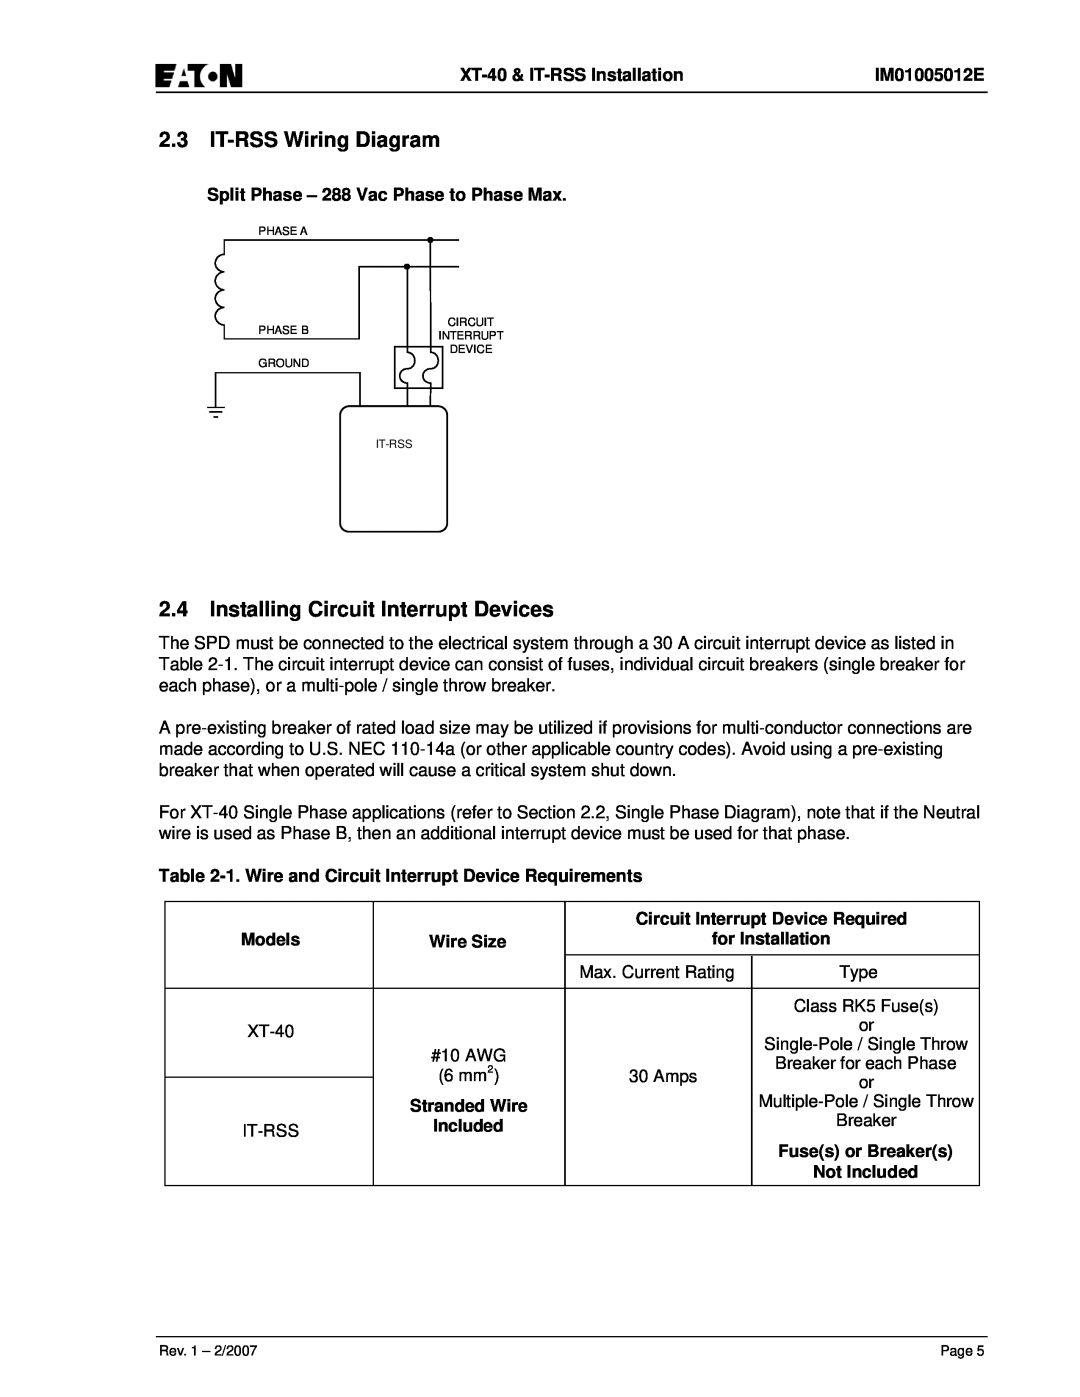 Eaton Electrical IT-RSS Wiring Diagram, Installing Circuit Interrupt Devices, Wire Size, for Installation, Included 